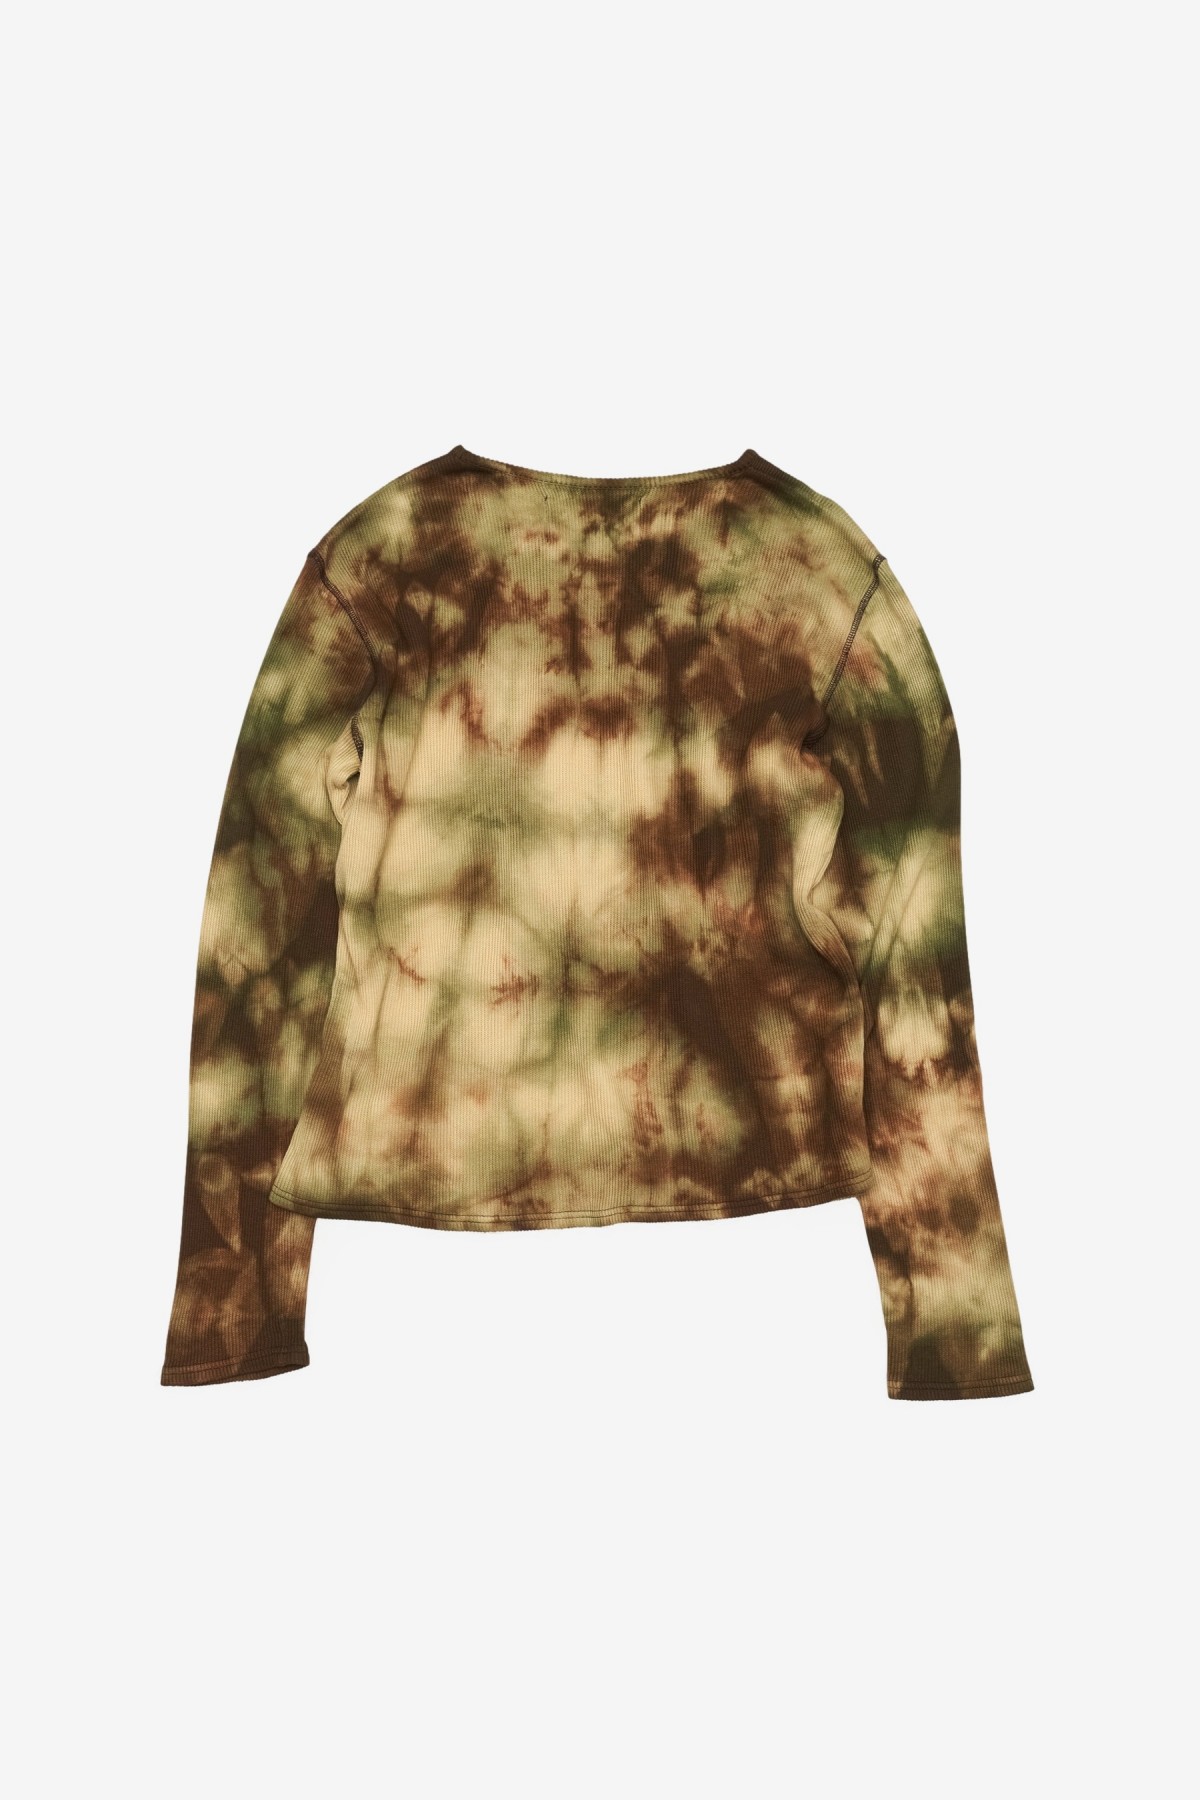 Stockholm Surfboard Club Waffle Longsleeve in Green and Brown